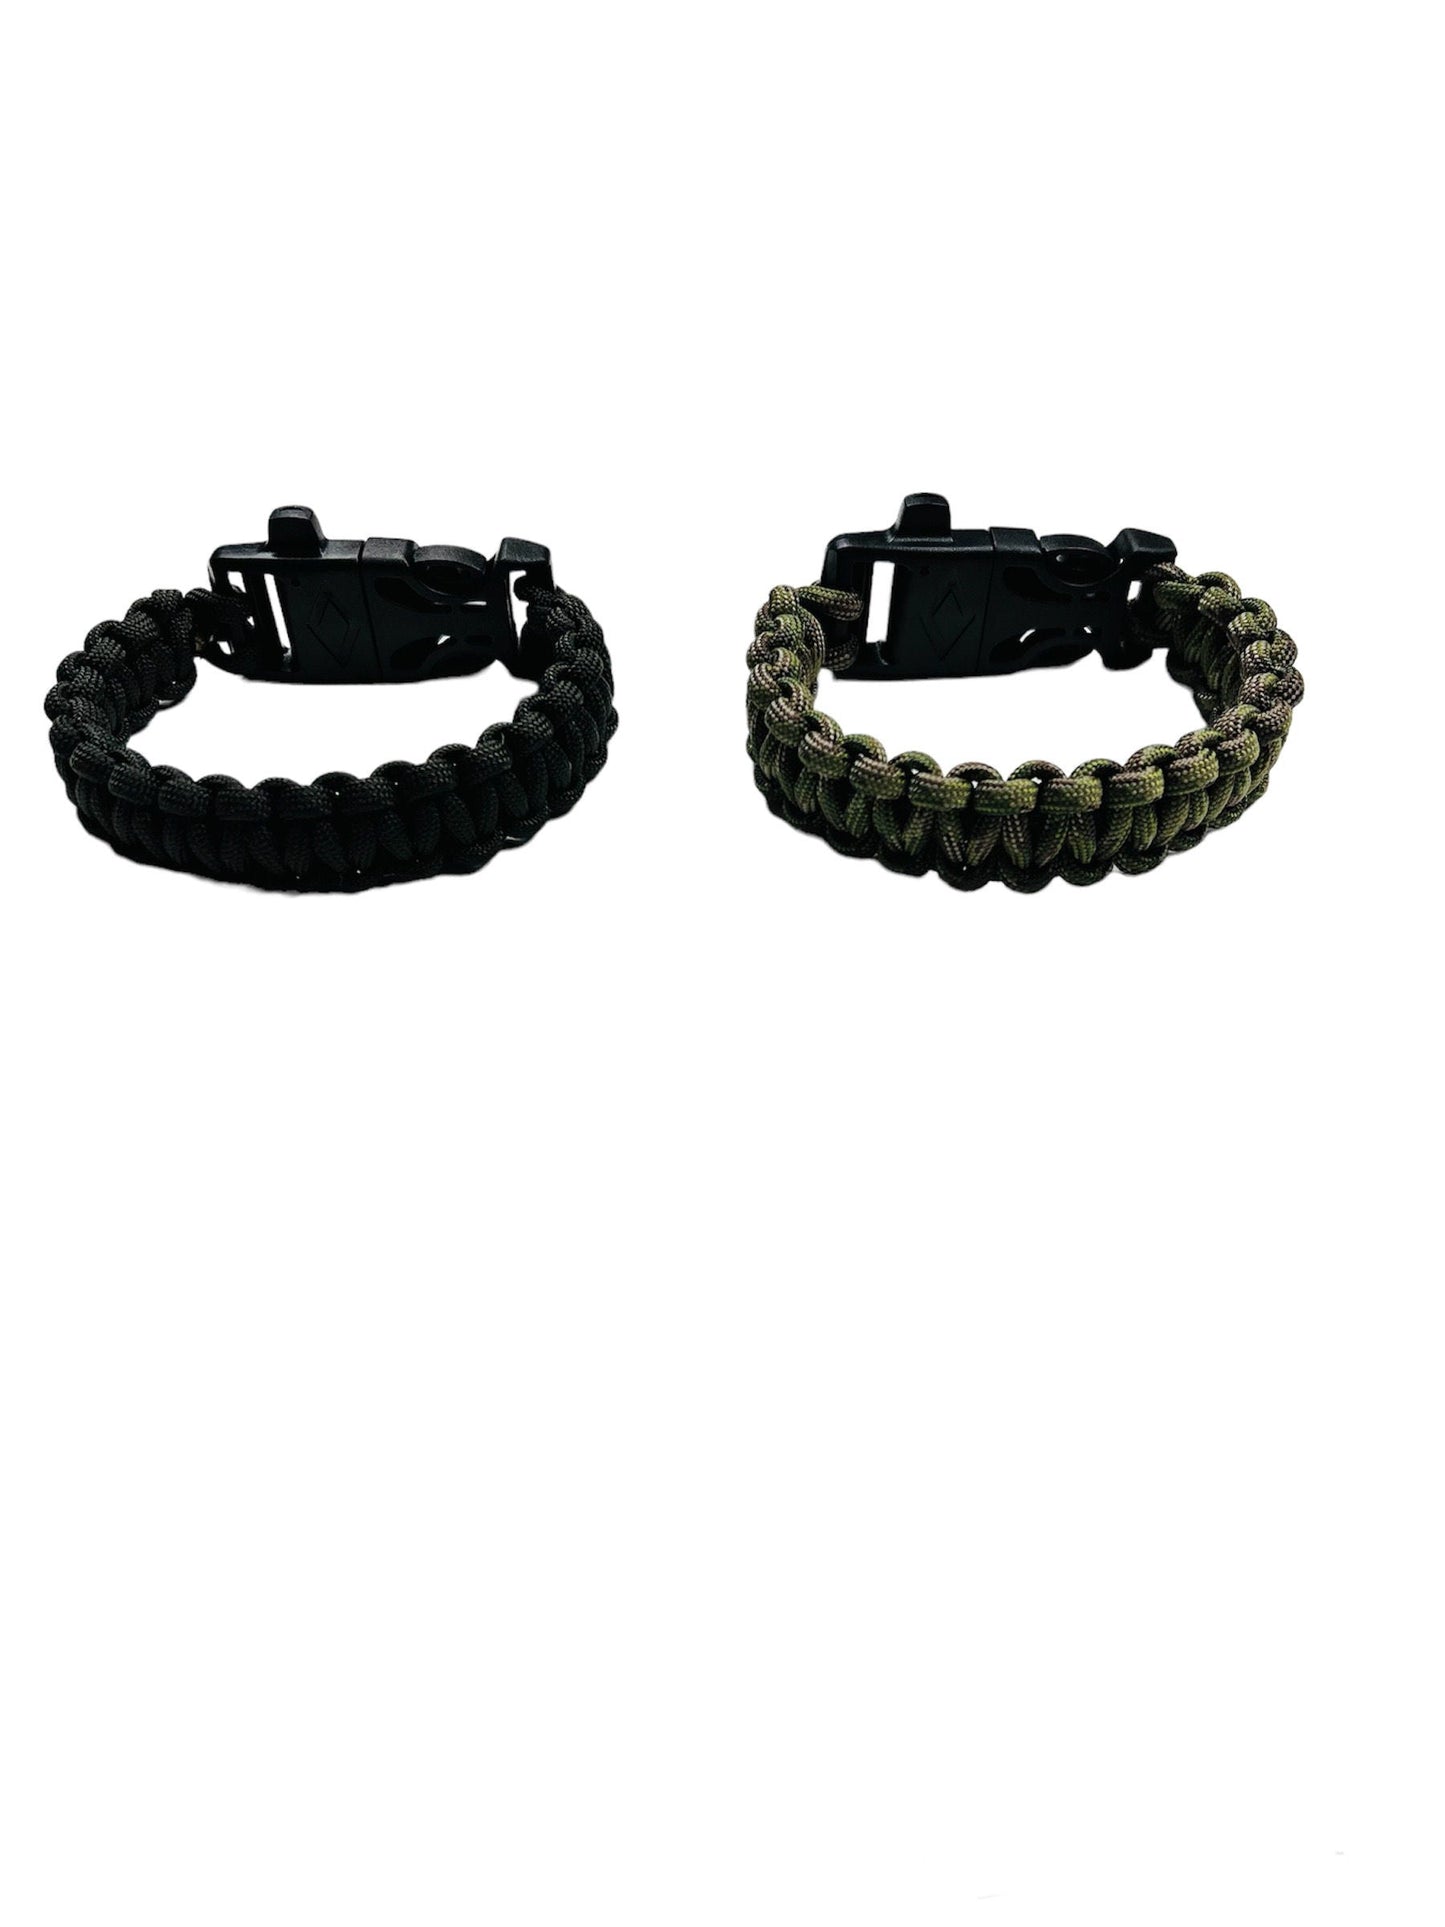 ONE Fire Starter Survival Bracelet: Ferro Rod Buckle w/Whistle. Fish ~ fire line Paracord Ages 18+. Adults only. Digital Camo, Orange, OR Drab Green. Multiple Variation Listing.